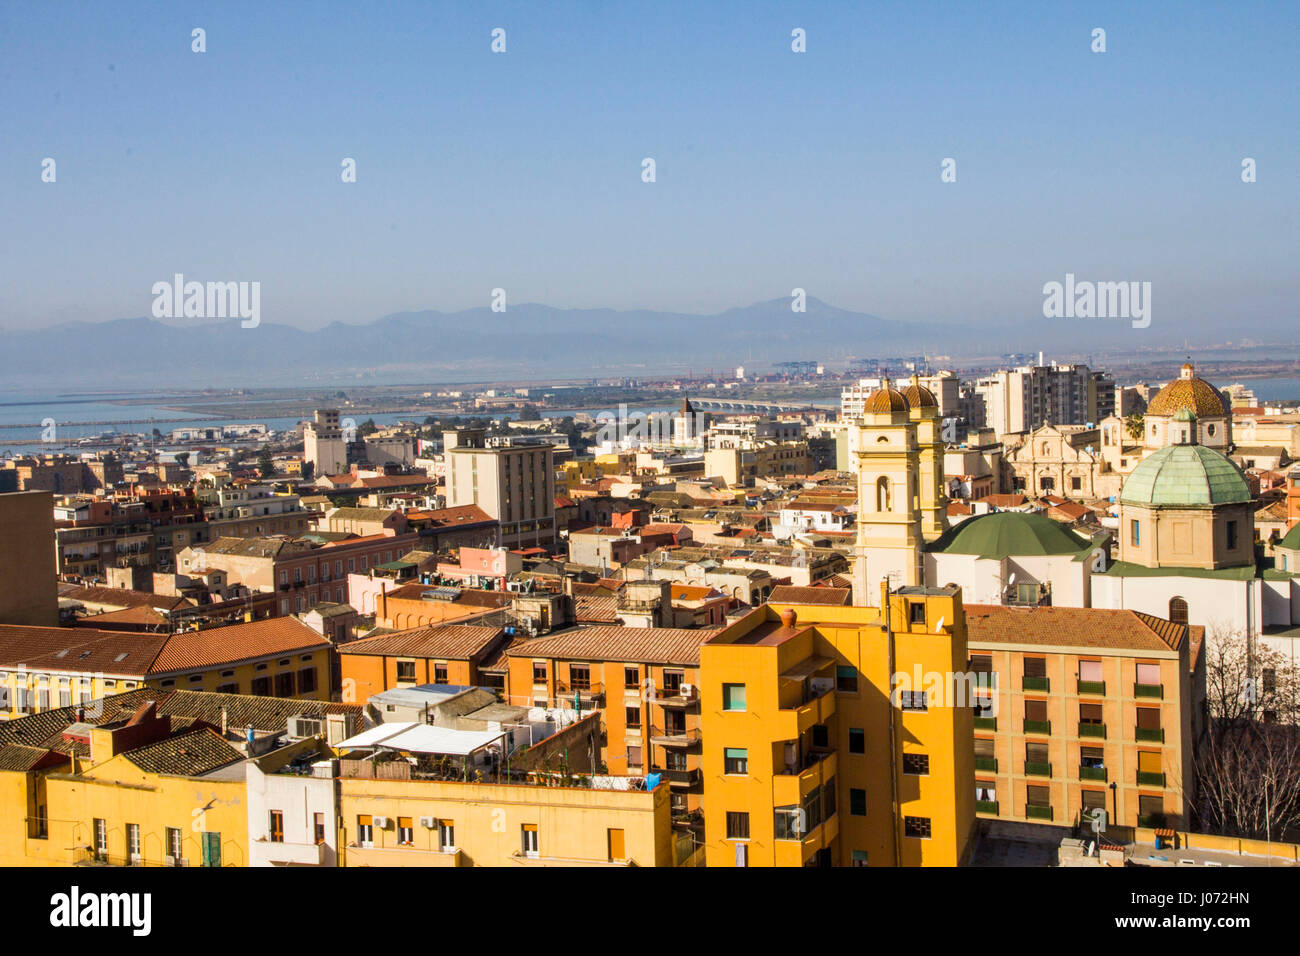 An overview of Cagliari from the Bastion of Saint Remy.  Calgiari, Sardinia, Italy. Stock Photo